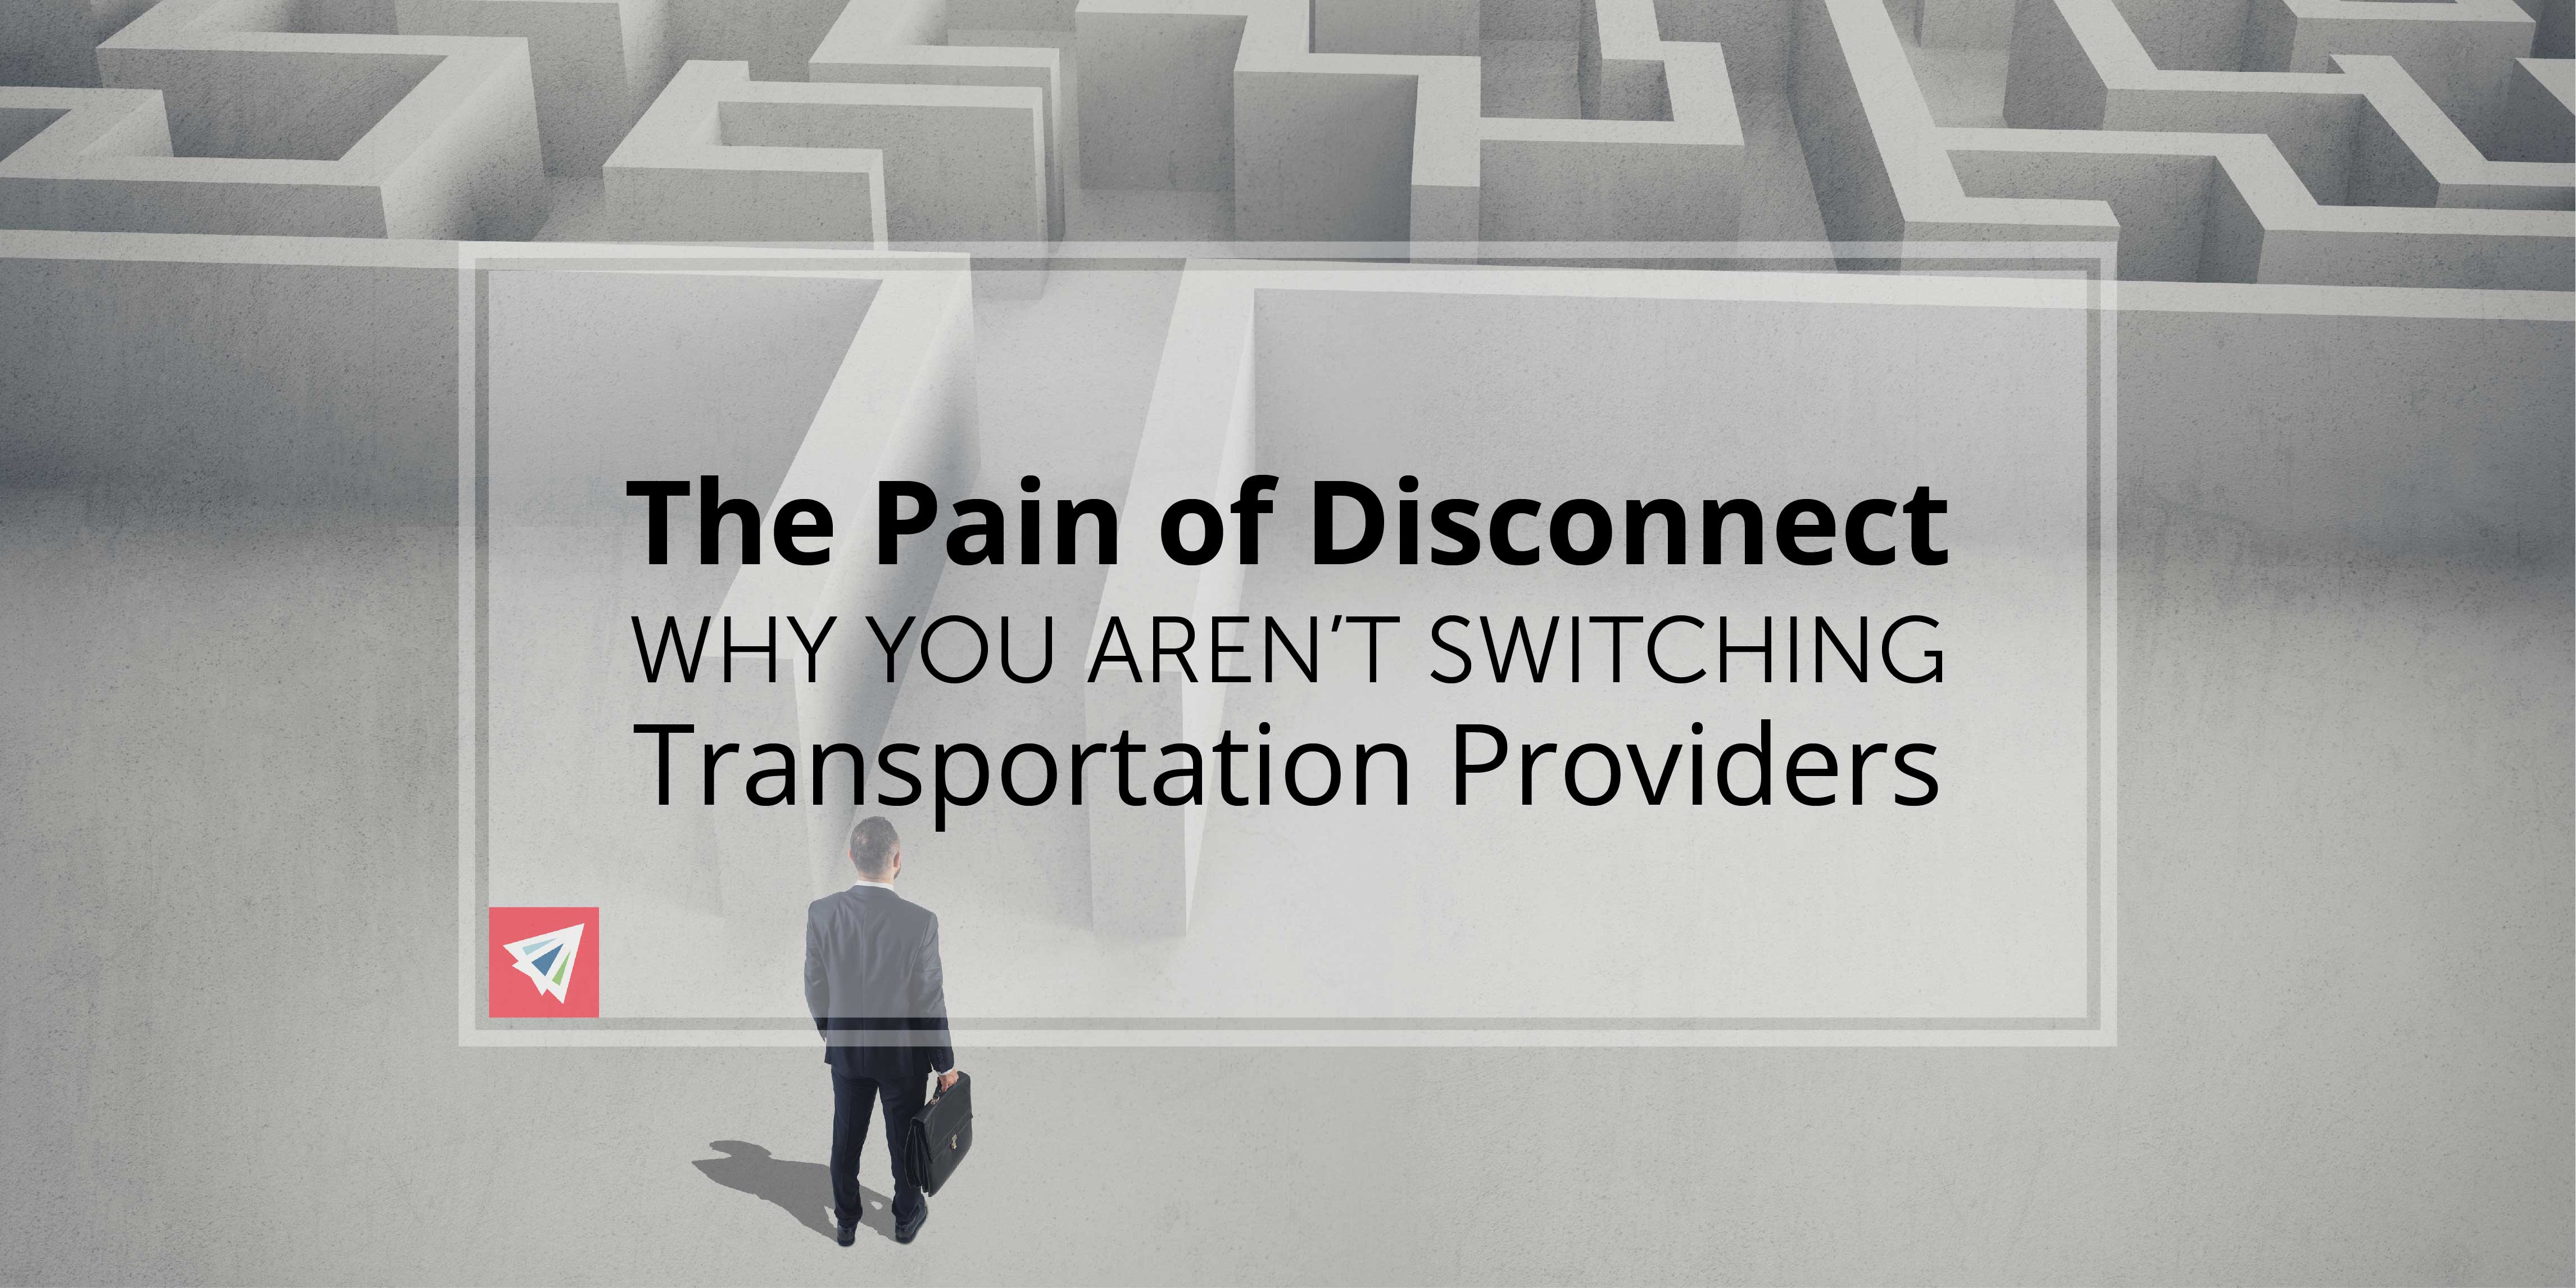 The Pain of Disconnect - Why You Aren't Switching Transportation Vendors